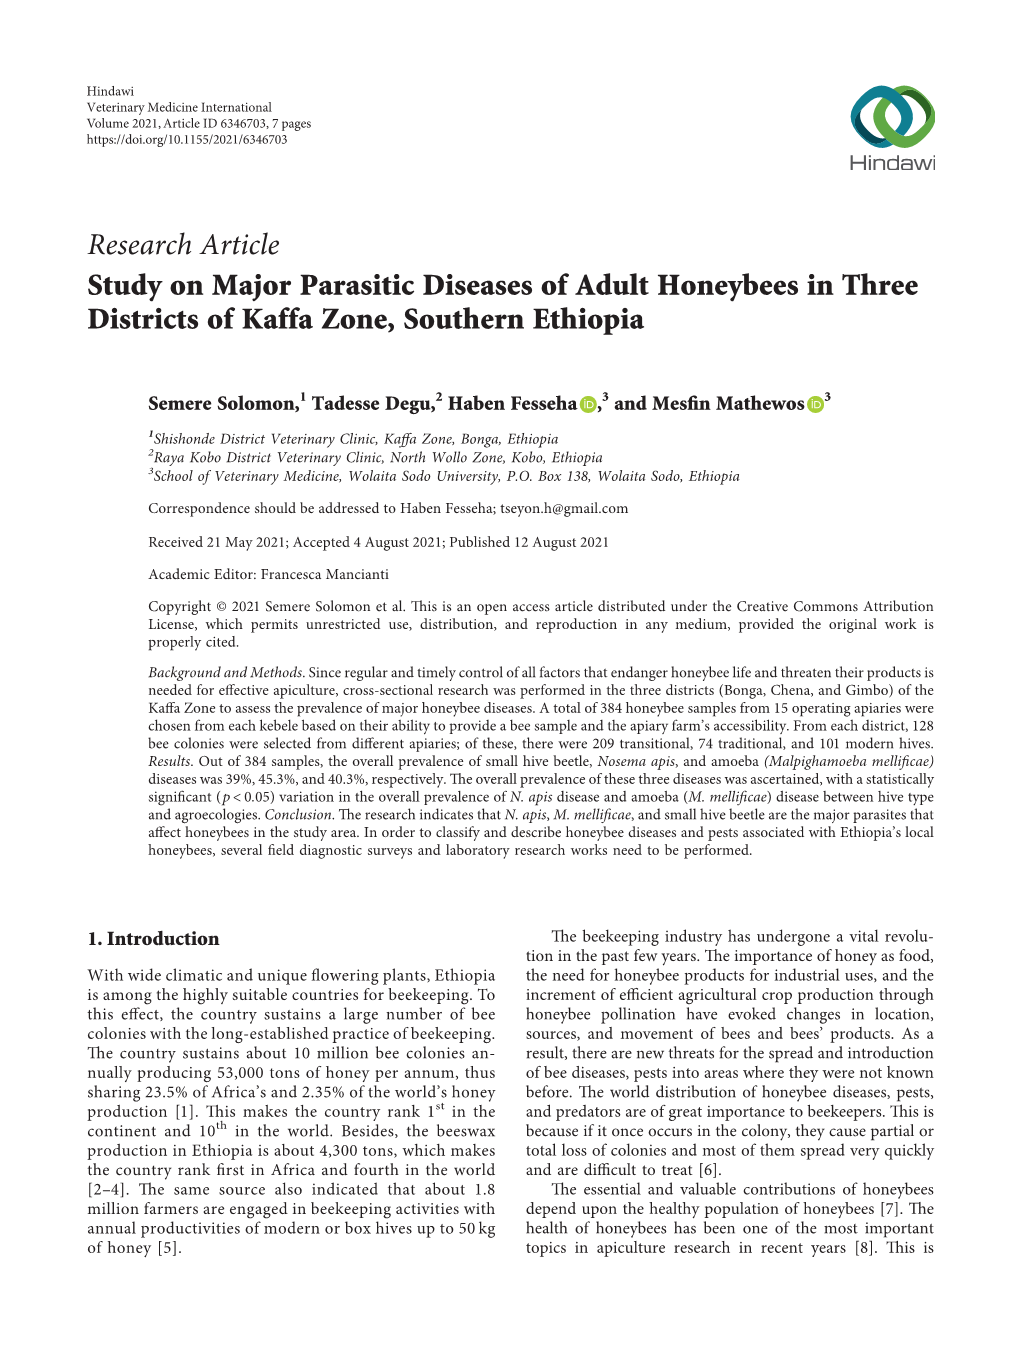 Study on Major Parasitic Diseases of Adult Honeybees in Three Districts of Kaffa Zone, Southern Ethiopia